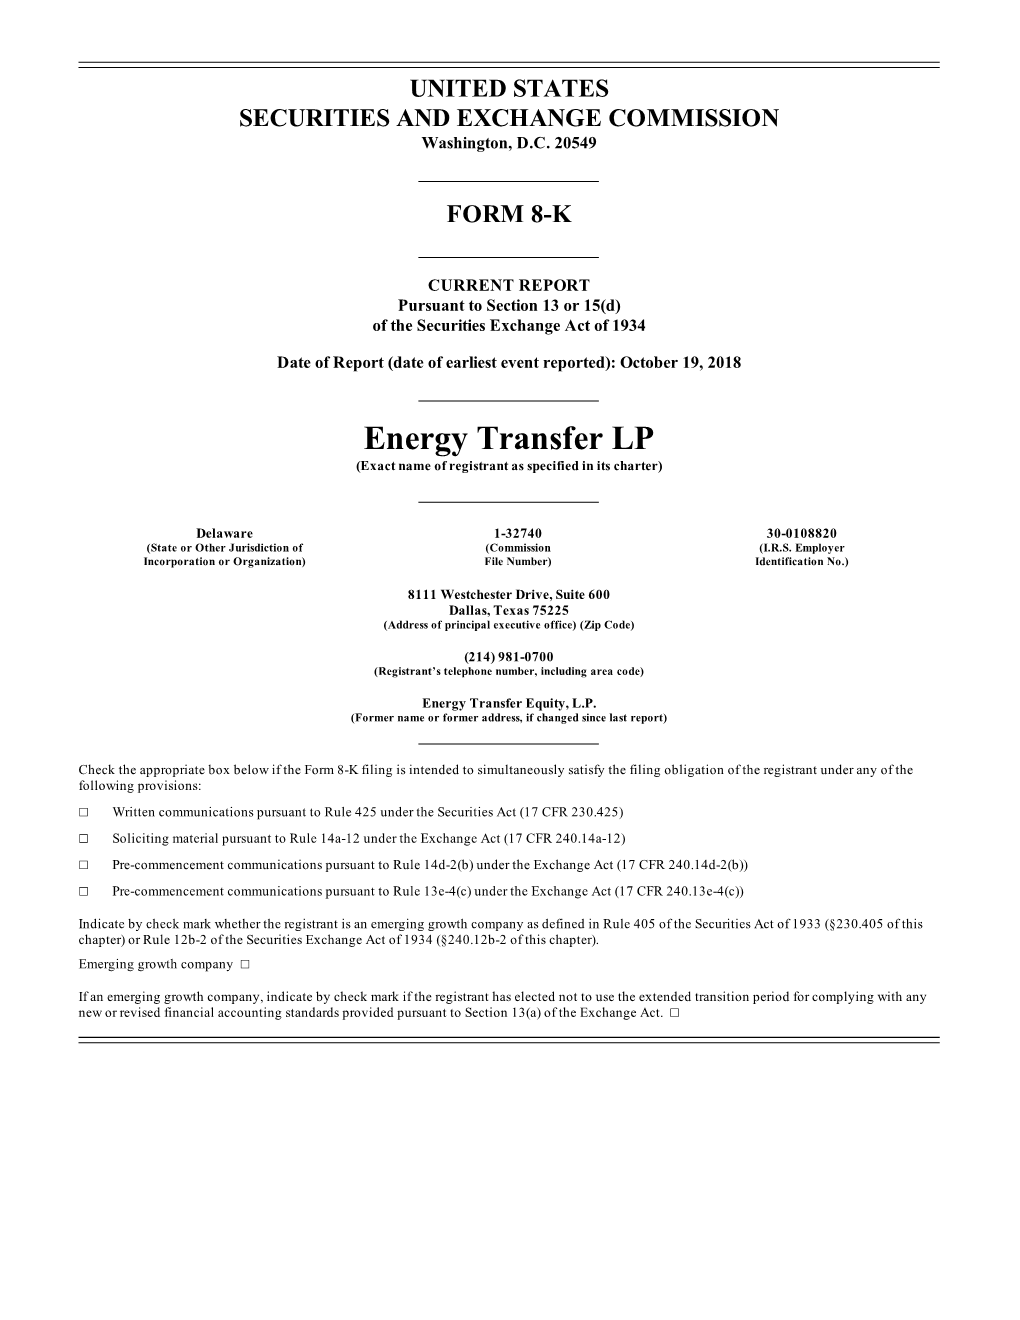 Energy Transfer LP (Exact Name of Registrant As Specified in Its Charter)